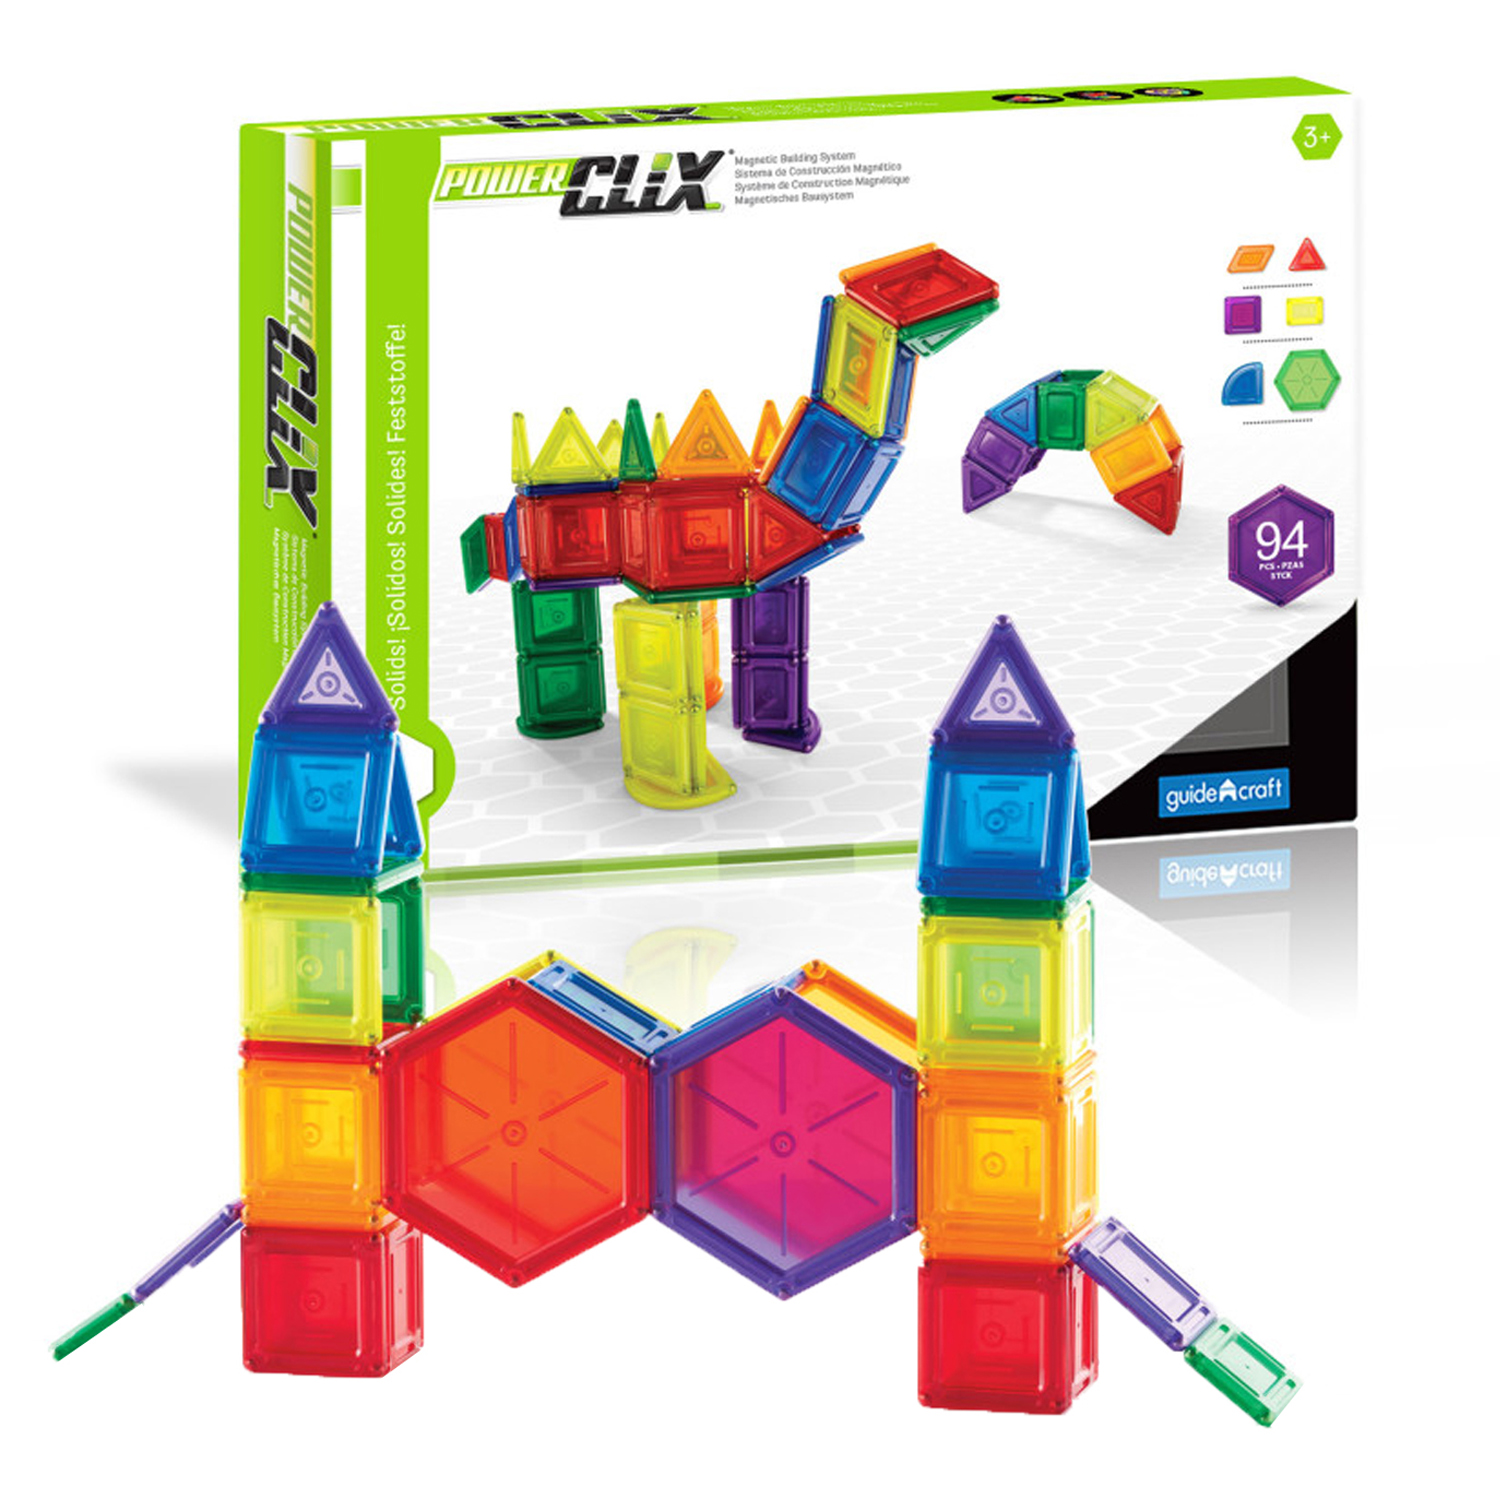 Guidecraft PowerClix Solids, Magnetic Building Set, 94 Pieces image number null